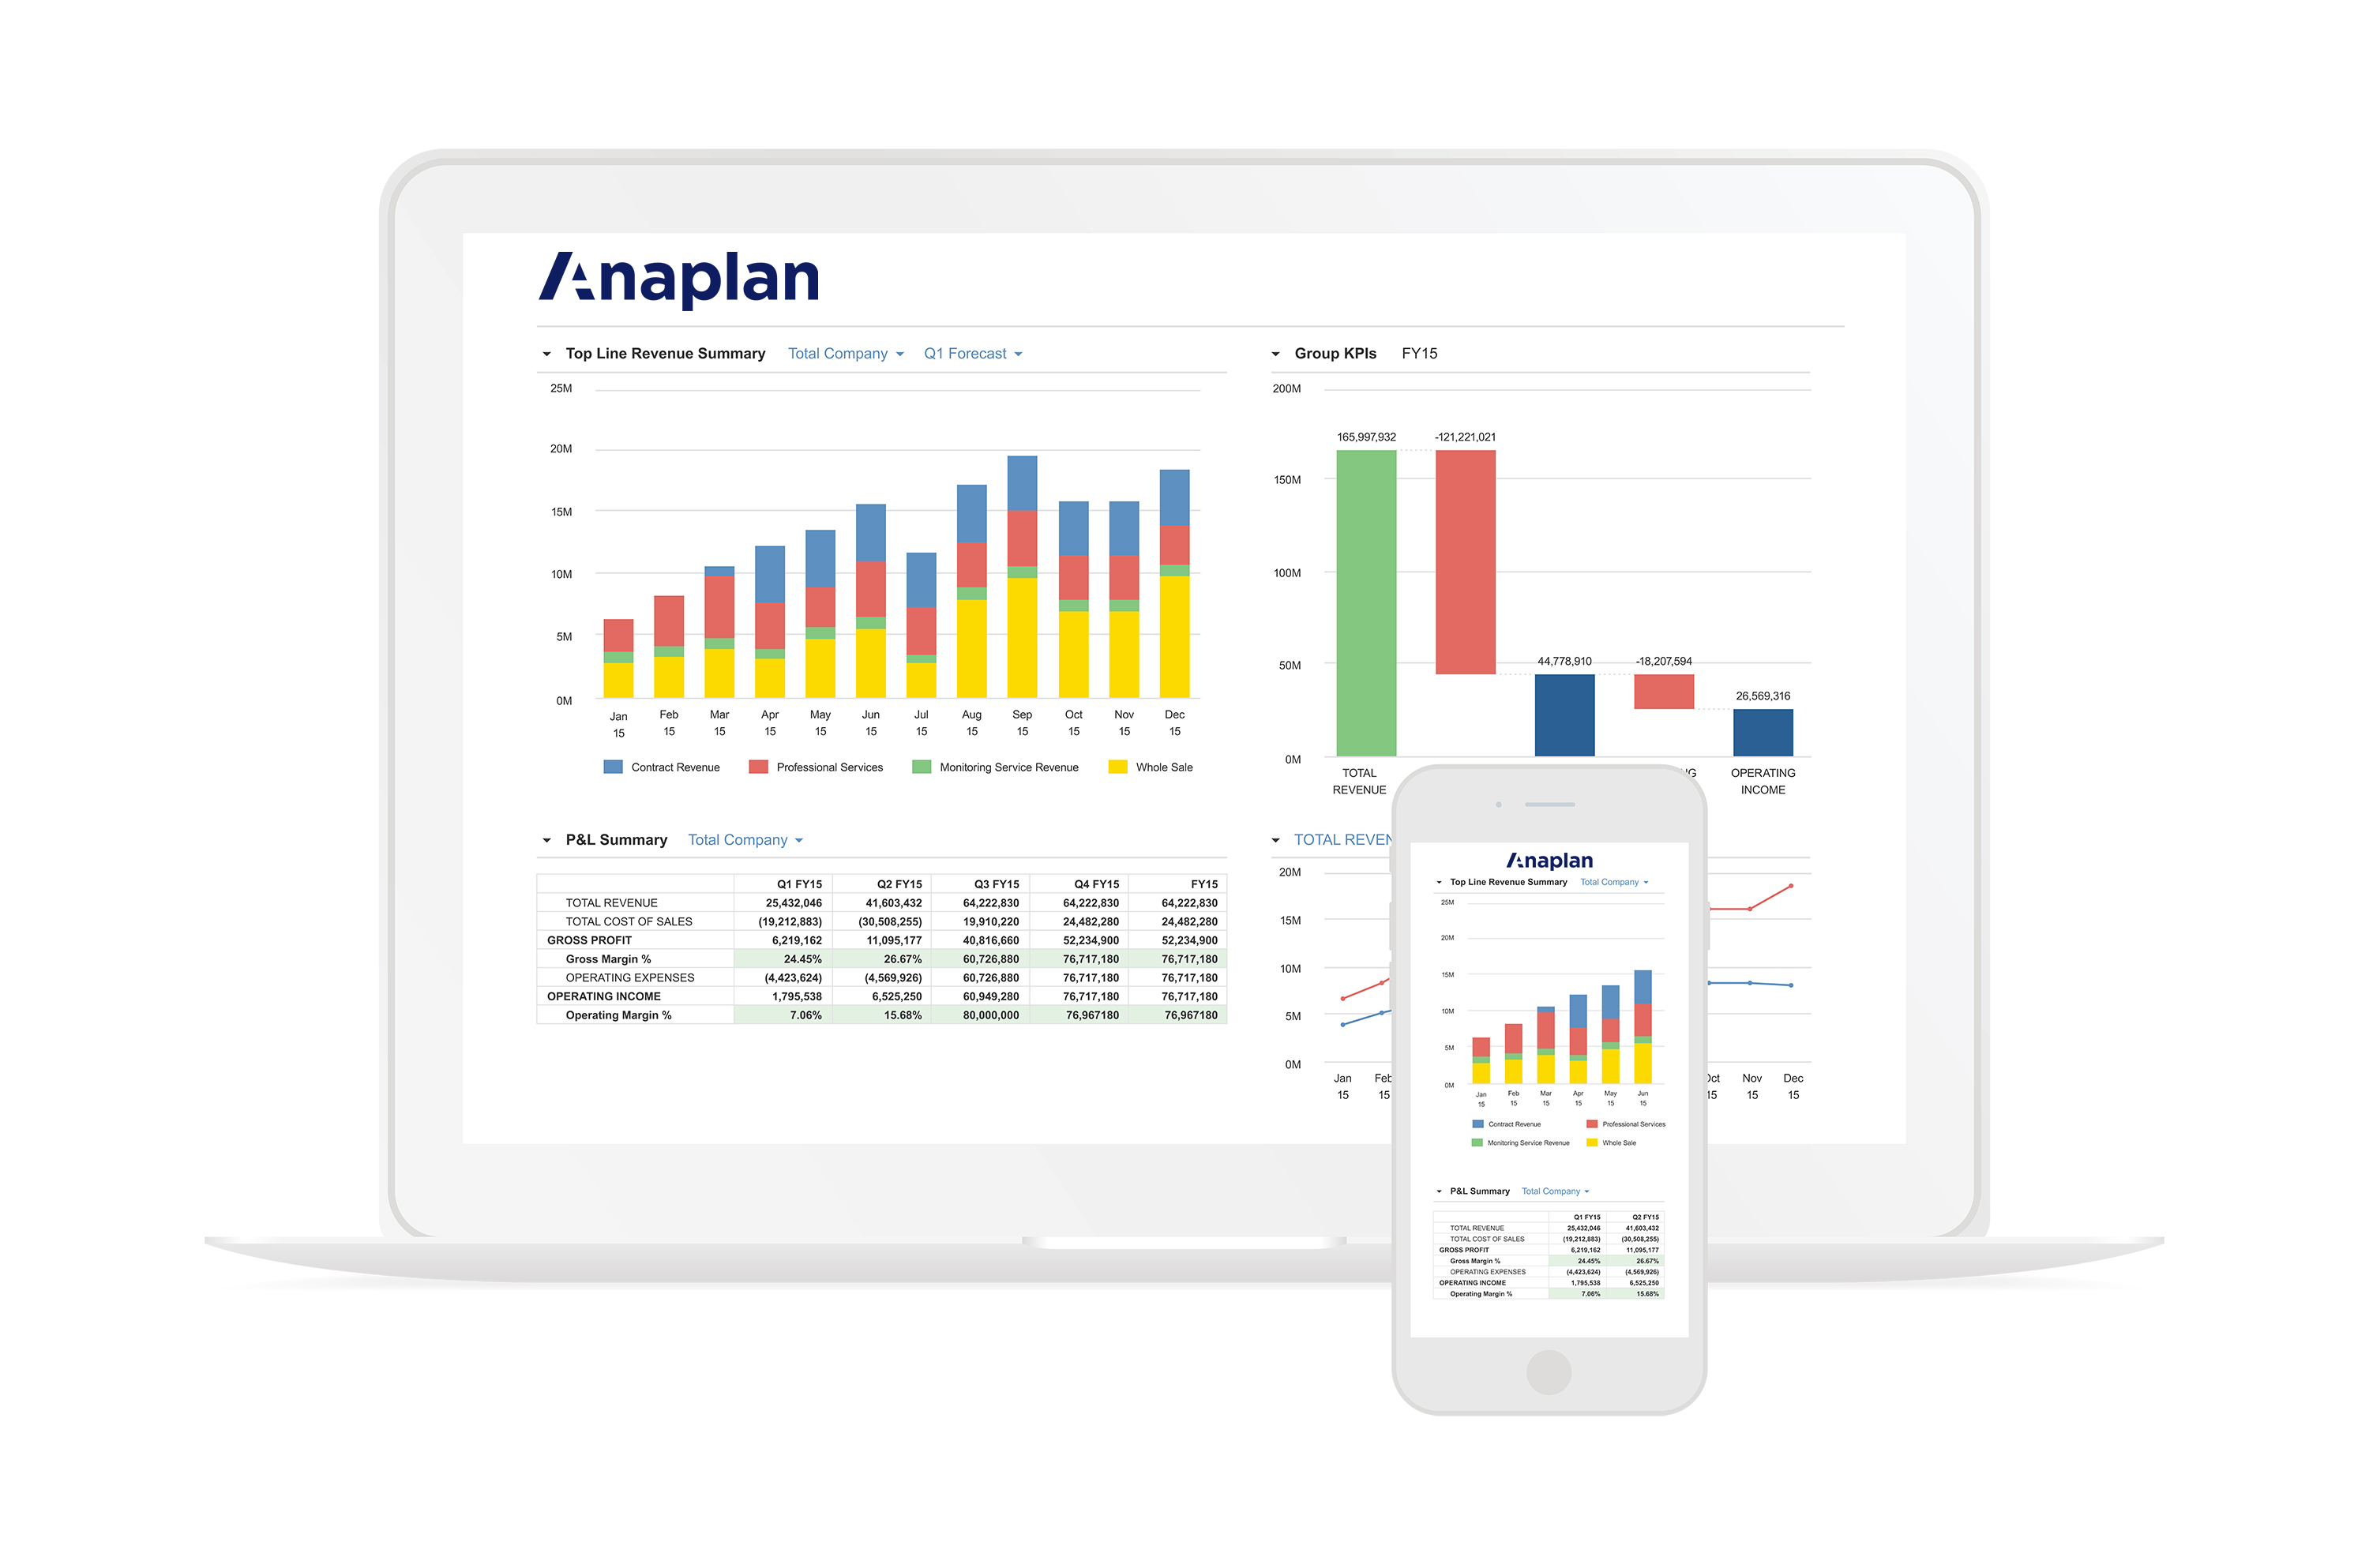 integrated business planning anaplan